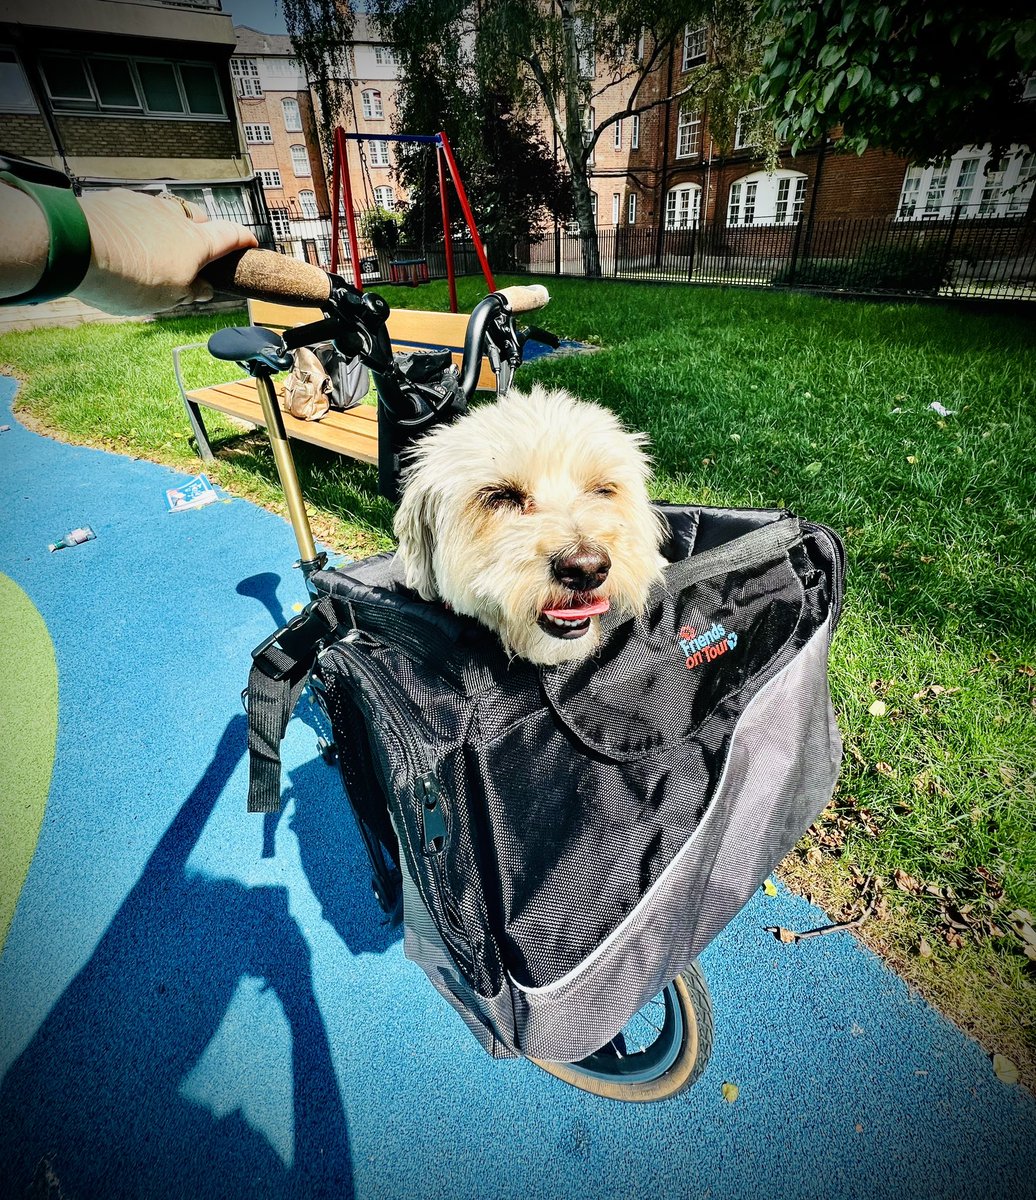 @BromptonBicycle @BromptonJnLDN @Will_Brompton 
No standard Brompton bag for doggies, so I had to make my own!
(With help from Dr Bike)
🚲🐶